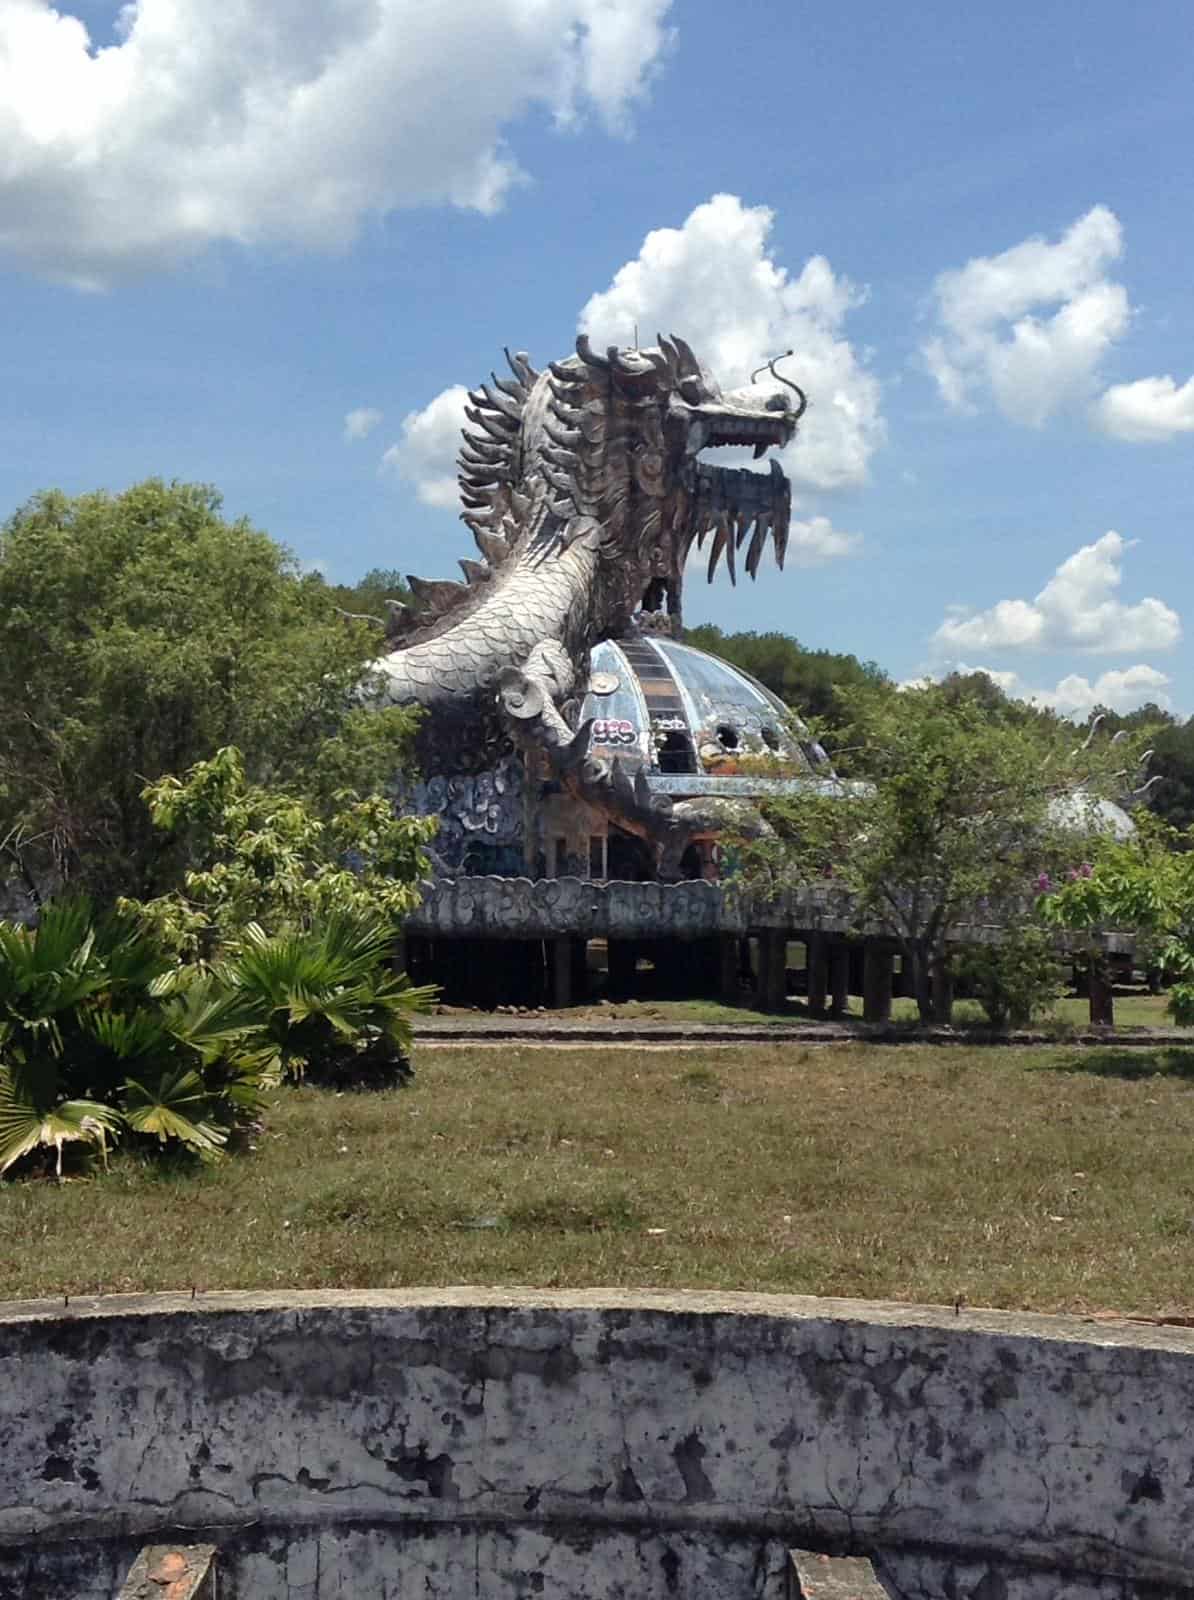 A dragon statue at Ho Thuy Tien, an abandoned water park in Hue, Vietnam. The dragon is the centerpiece of the park and you can walk up inside it and reach the dragon's mouth from where you can see most of the park. In this image, there is dry grass and many trees surrounding the dragon, although it is also surrounded by a dried-up lake 